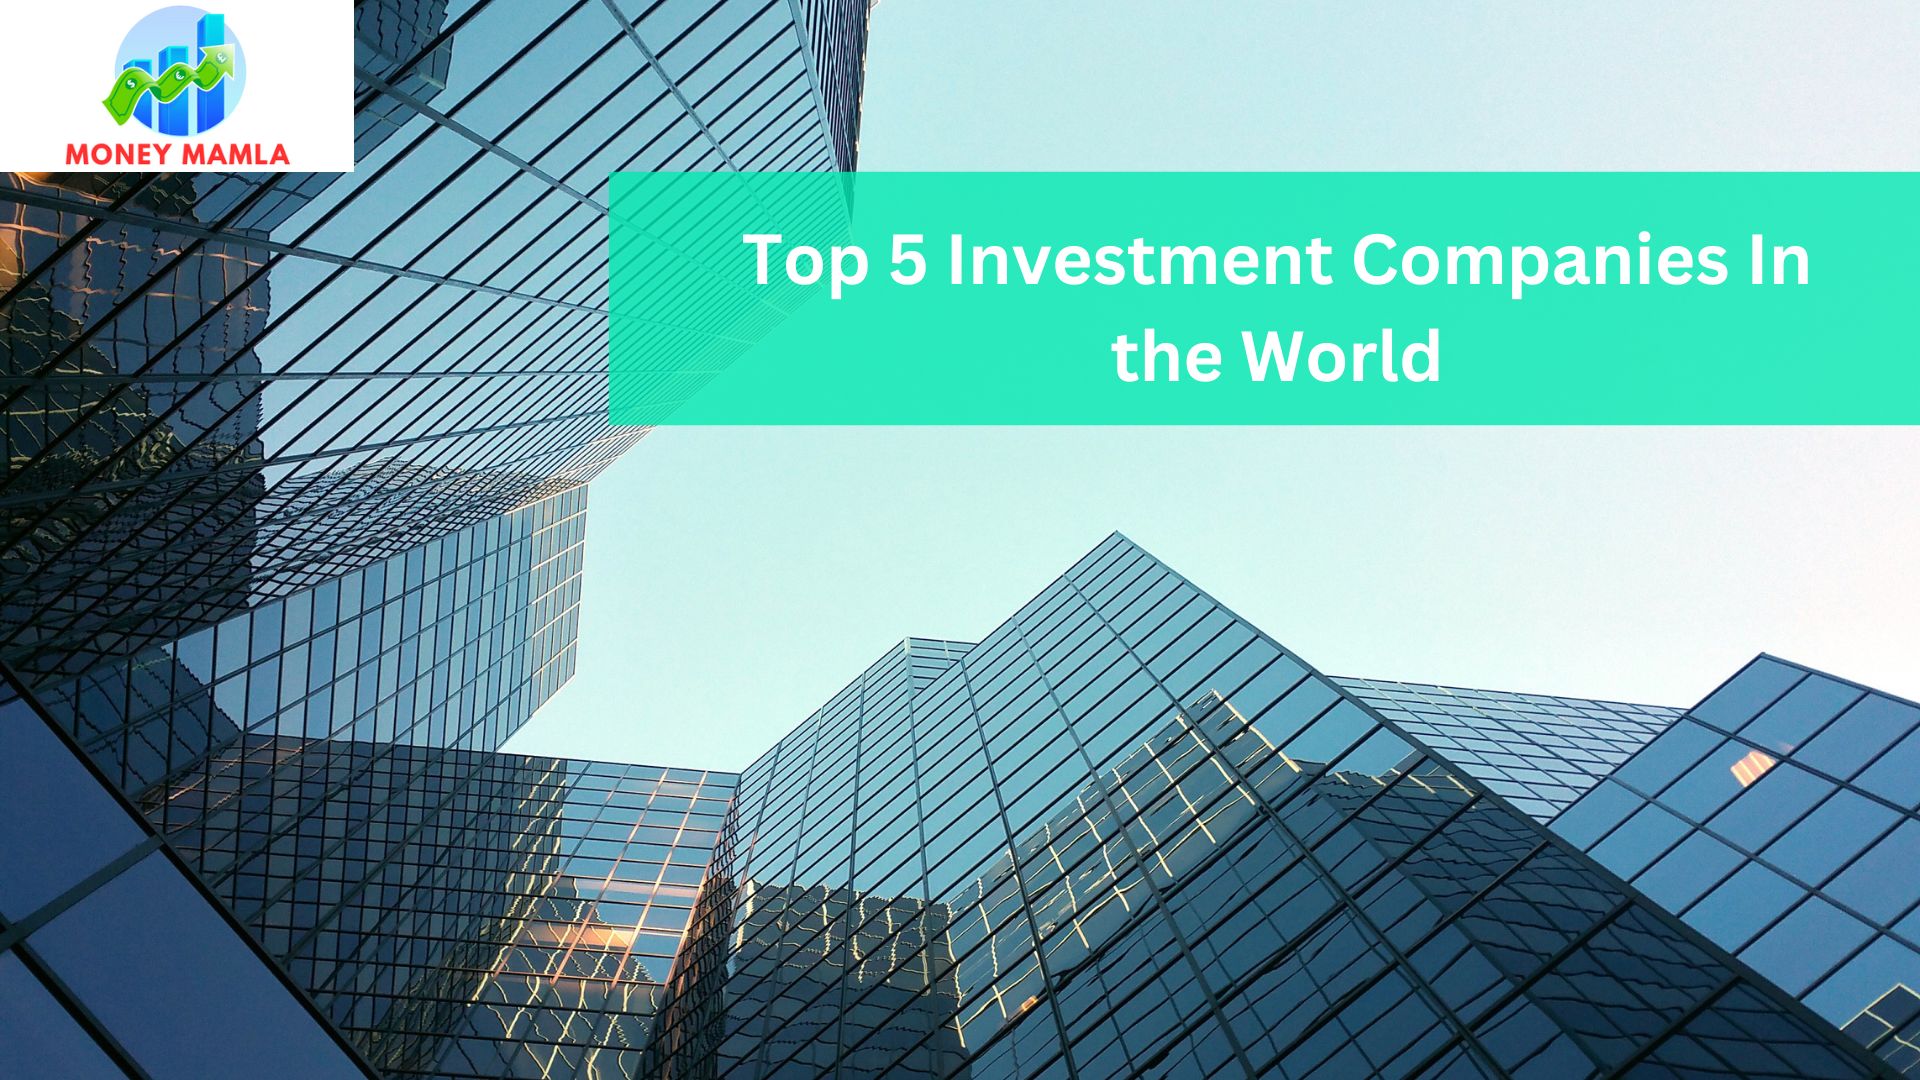 Top 5 investment companies in the world